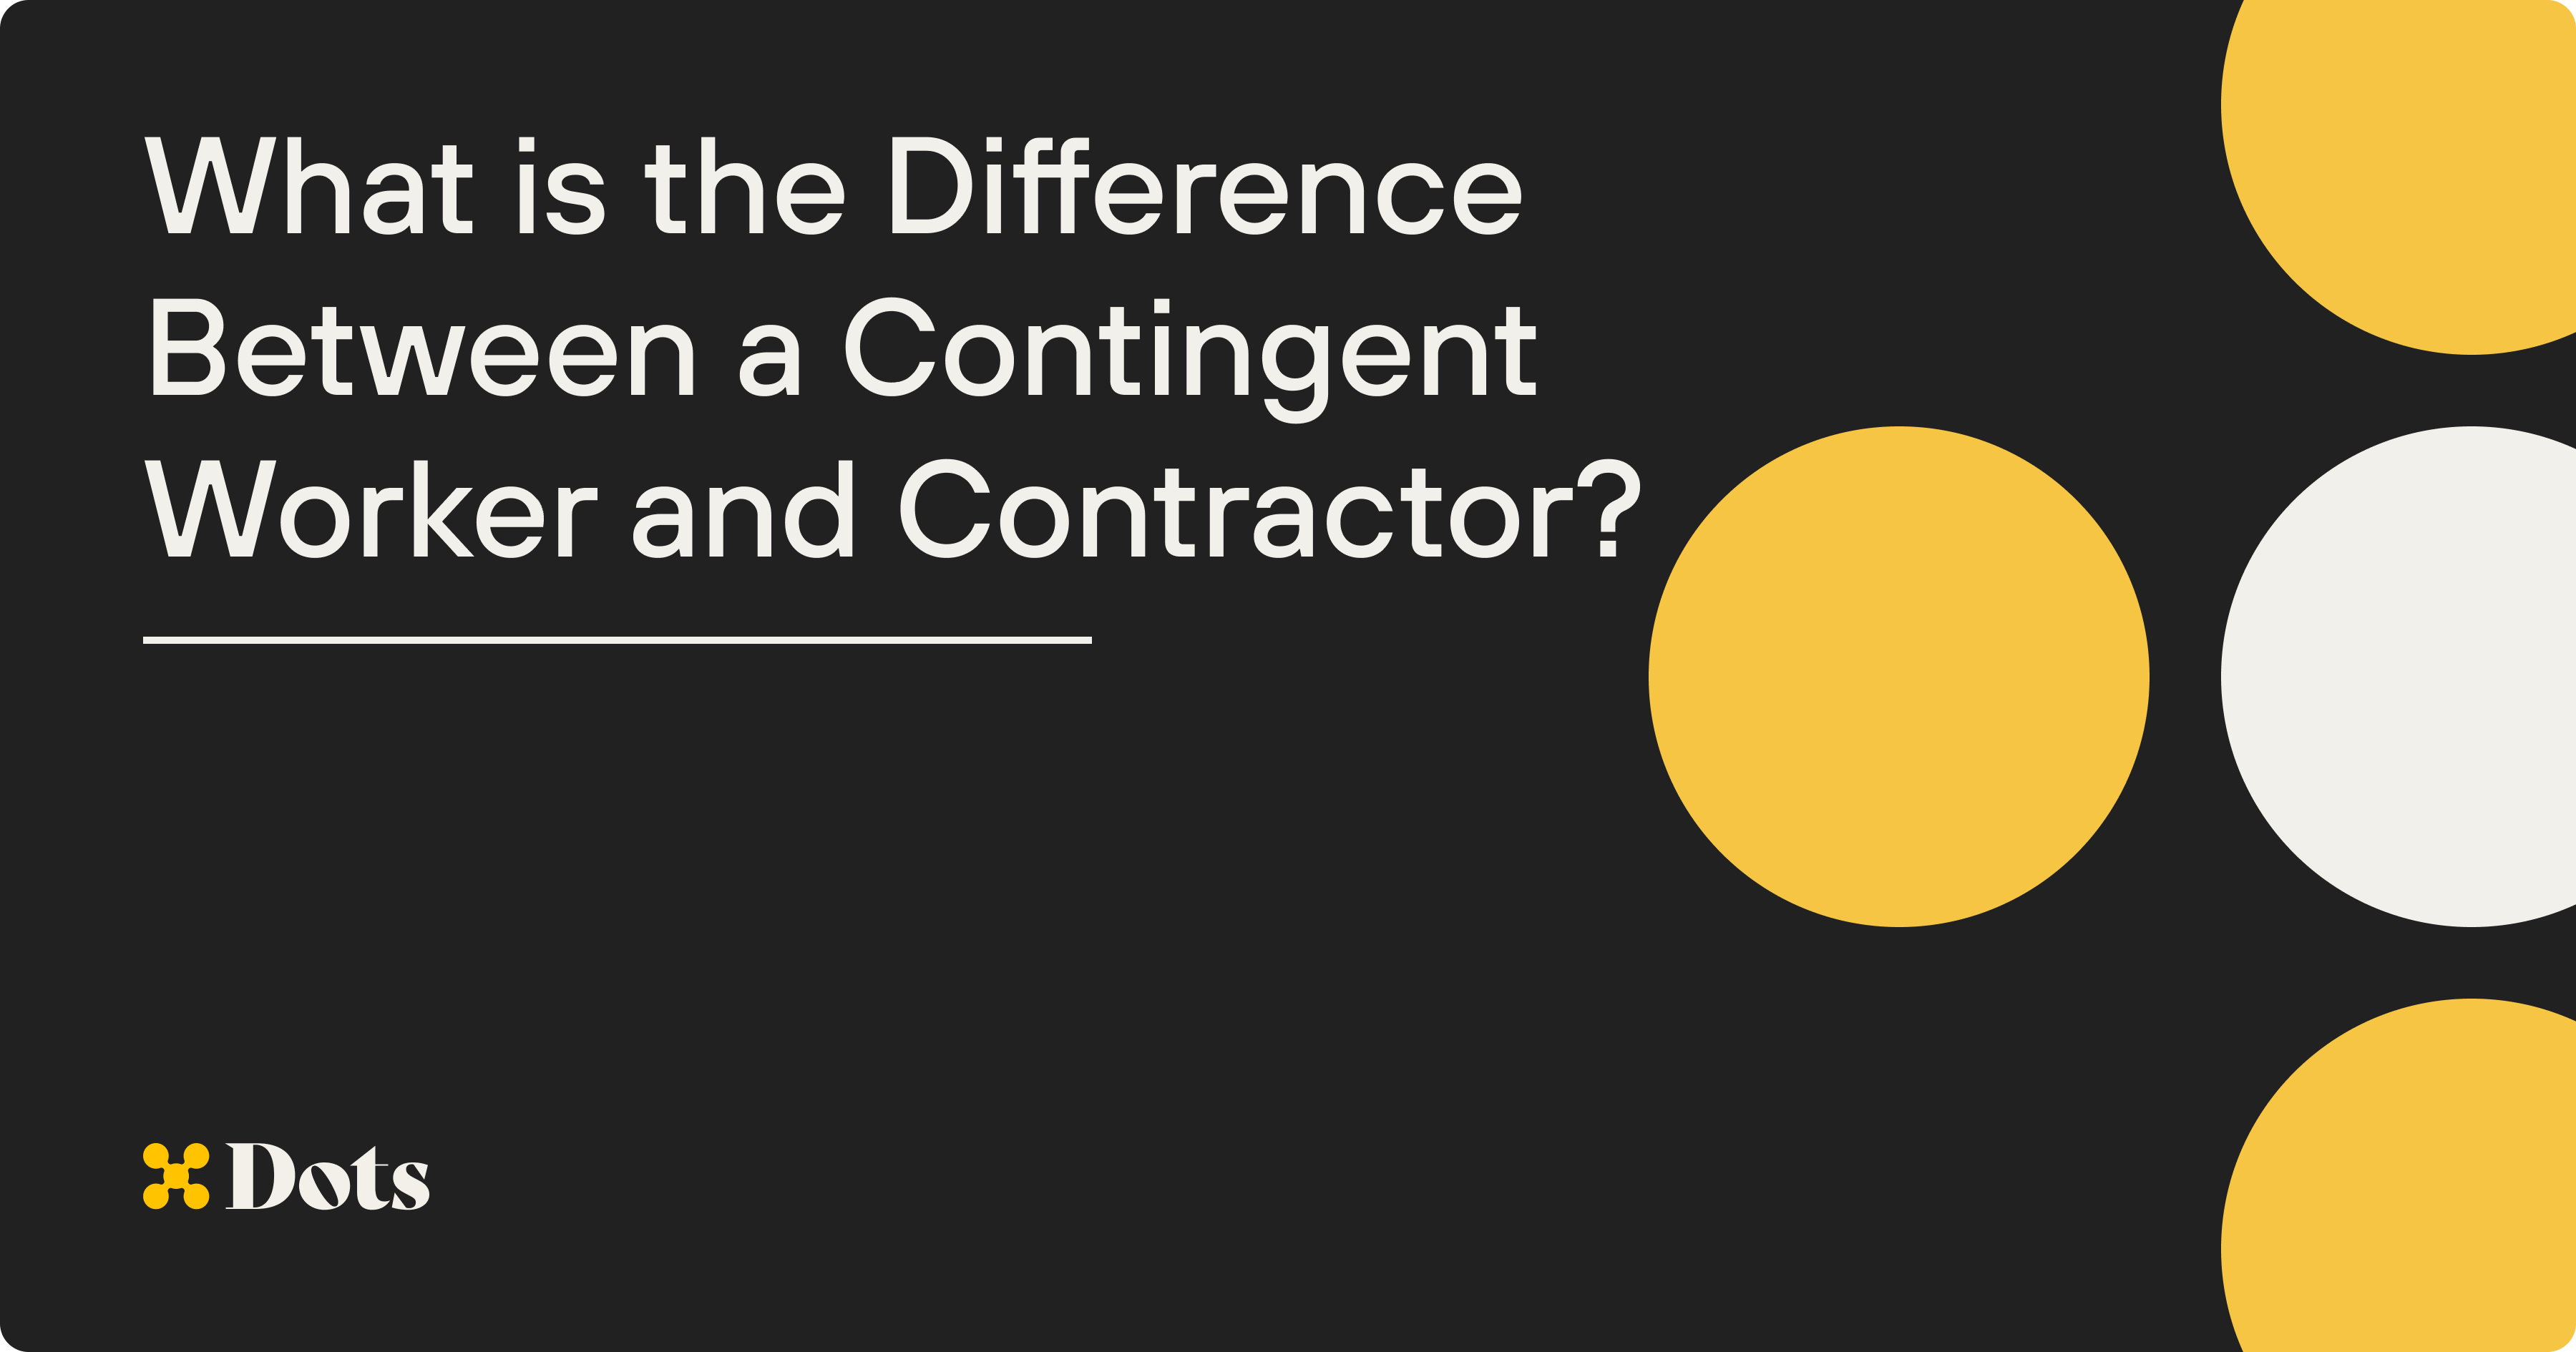 What is the Difference Between a Contingent Worker and Contractor?